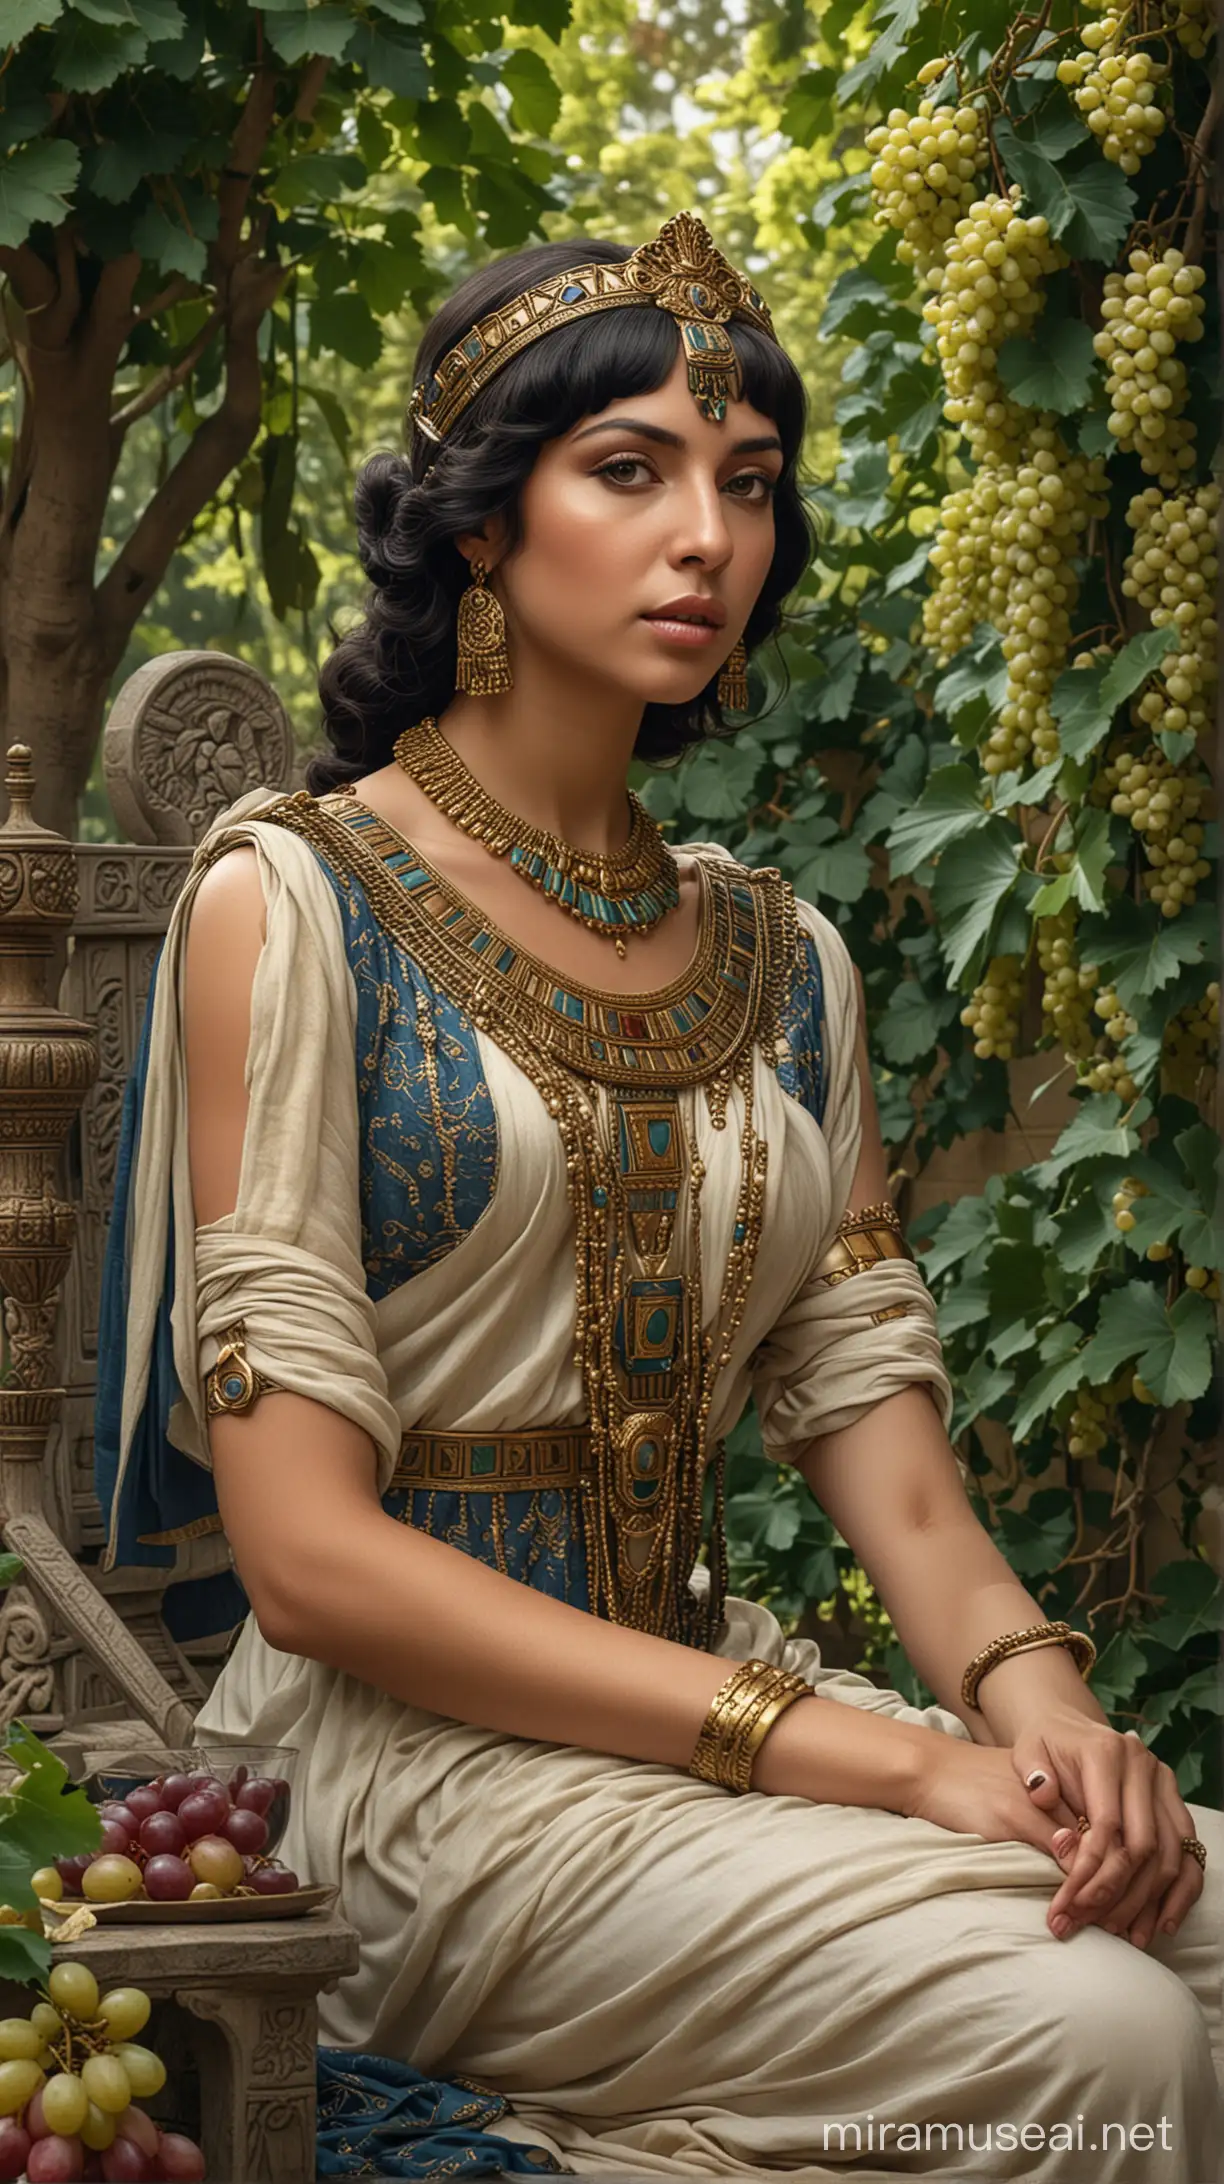 Visualise close look of Cleopatra, the Queen of Egypt, seated in a picturesque garden, enjoying juicy grapes. Servants attentively surround her, offering comfort and aid.. Hyper realistic image.